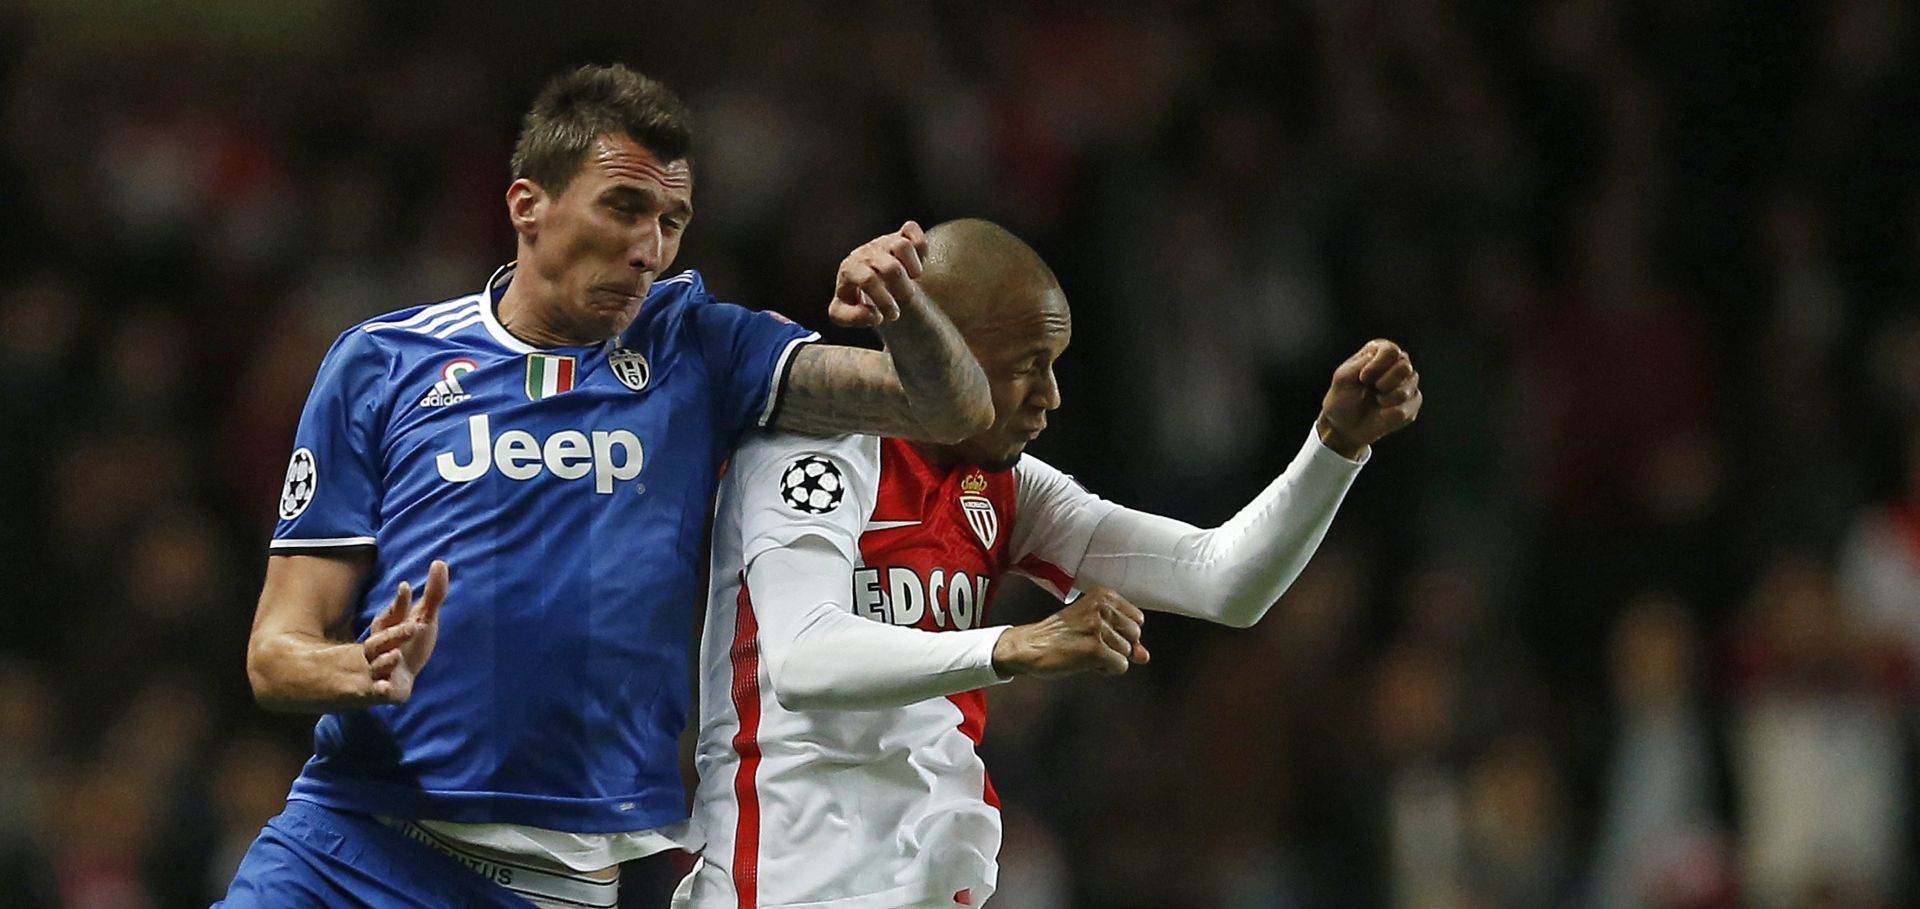 epa05942632 Mario Mandzukic (L) of Juventus FC vies for the ball with Fabinho (R) of AS Monaco during the UEFA Champions League semi final, first leg soccer match between AS Monaco and Juventus at Stade Louis II in Monaco, 03 May 2017.  EPA/GUILLAUME HORCAJUELO